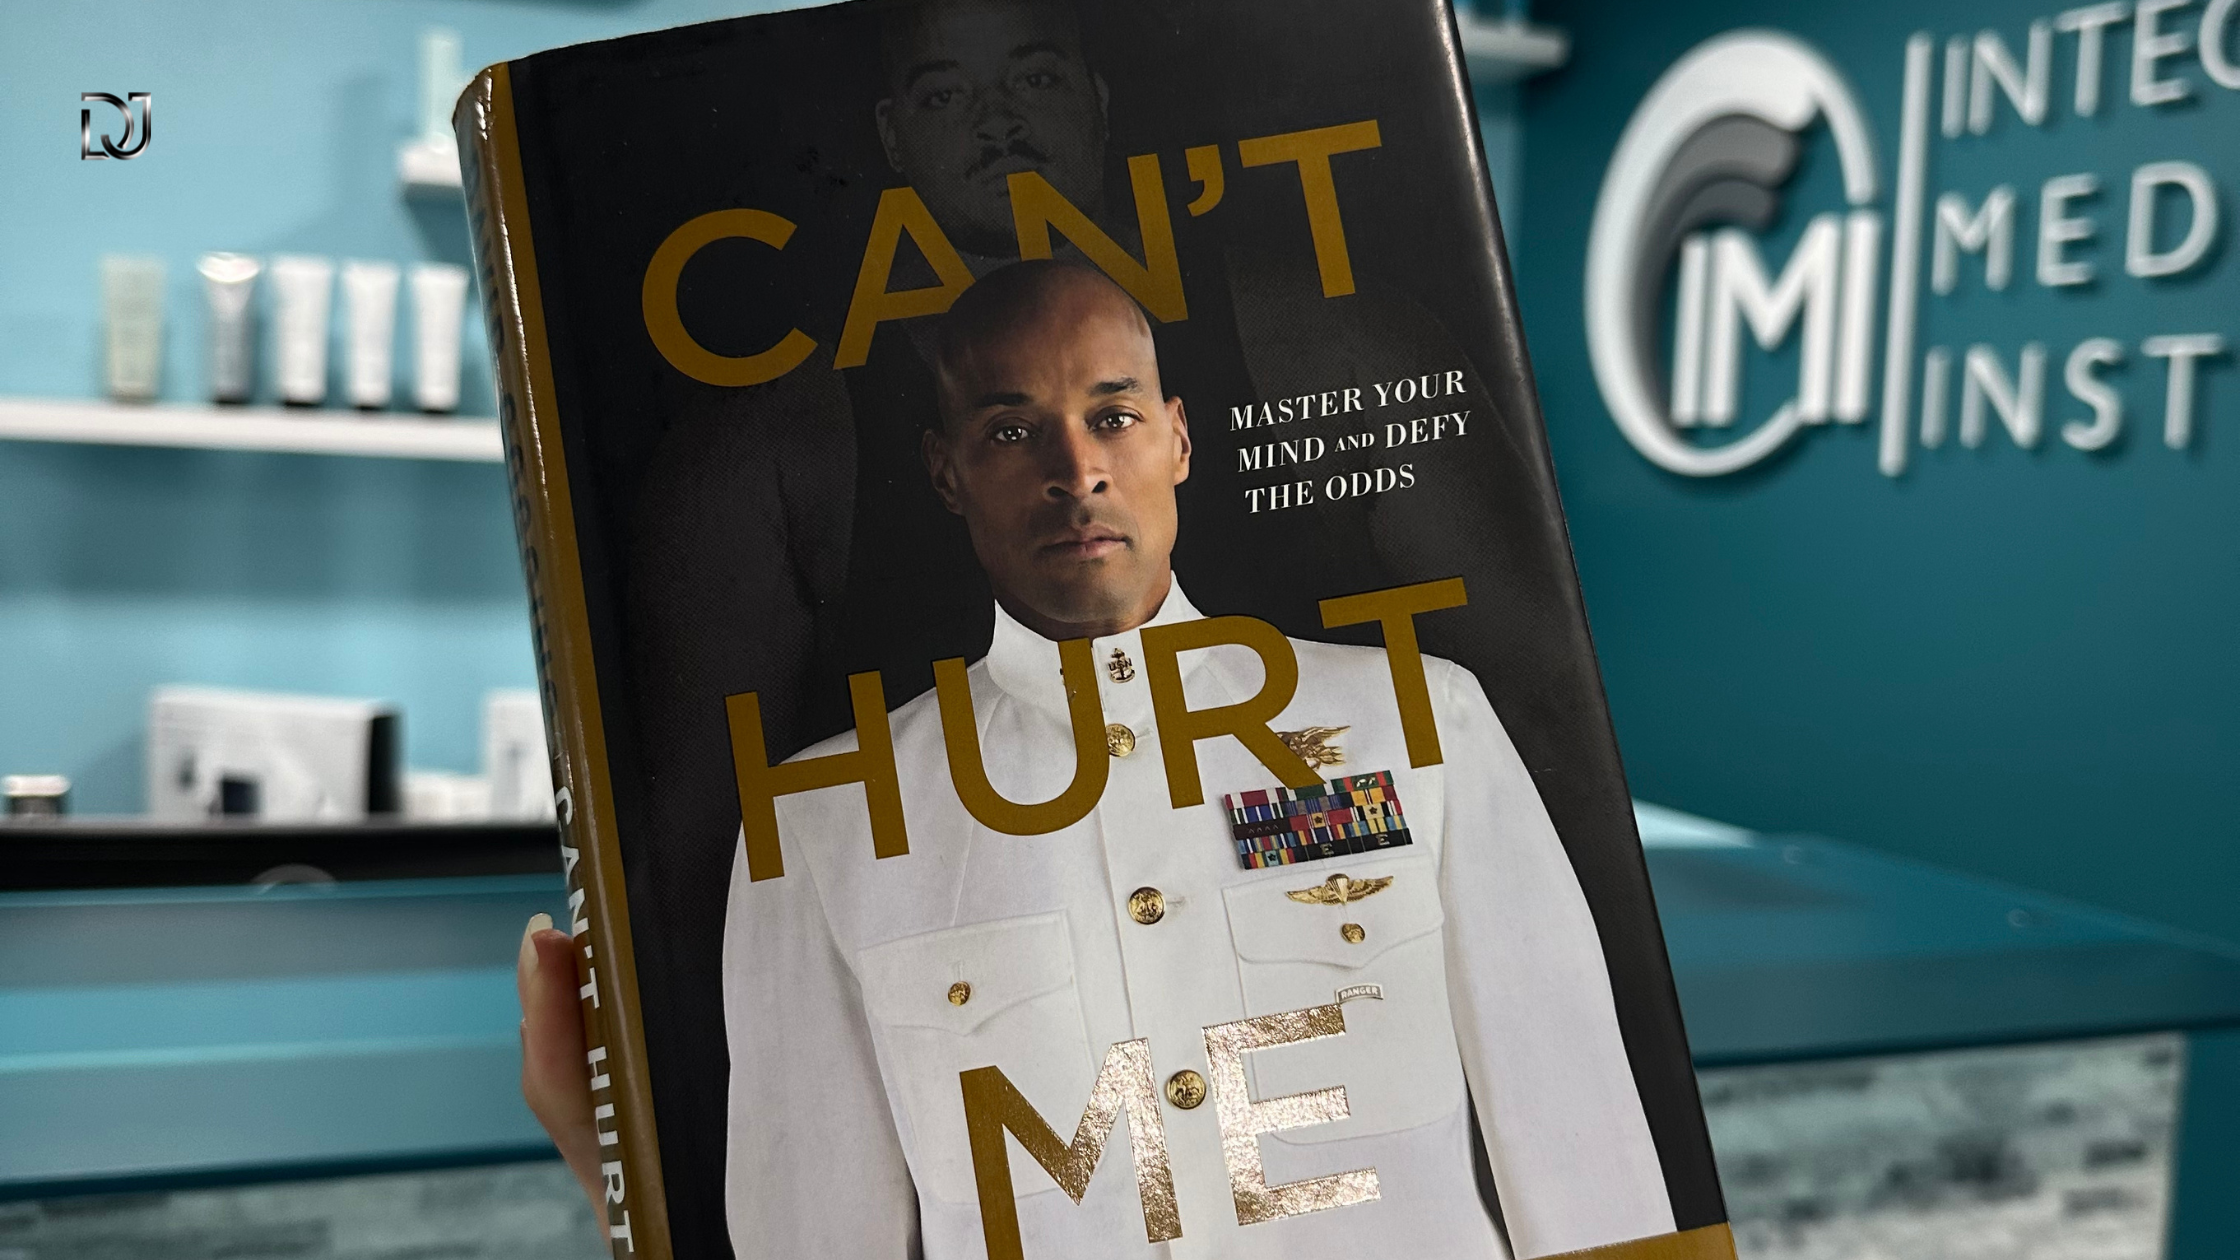 Book Review: “Can’t Hurt Me” by David Goggins – A Journey to Unbreakable Resilience